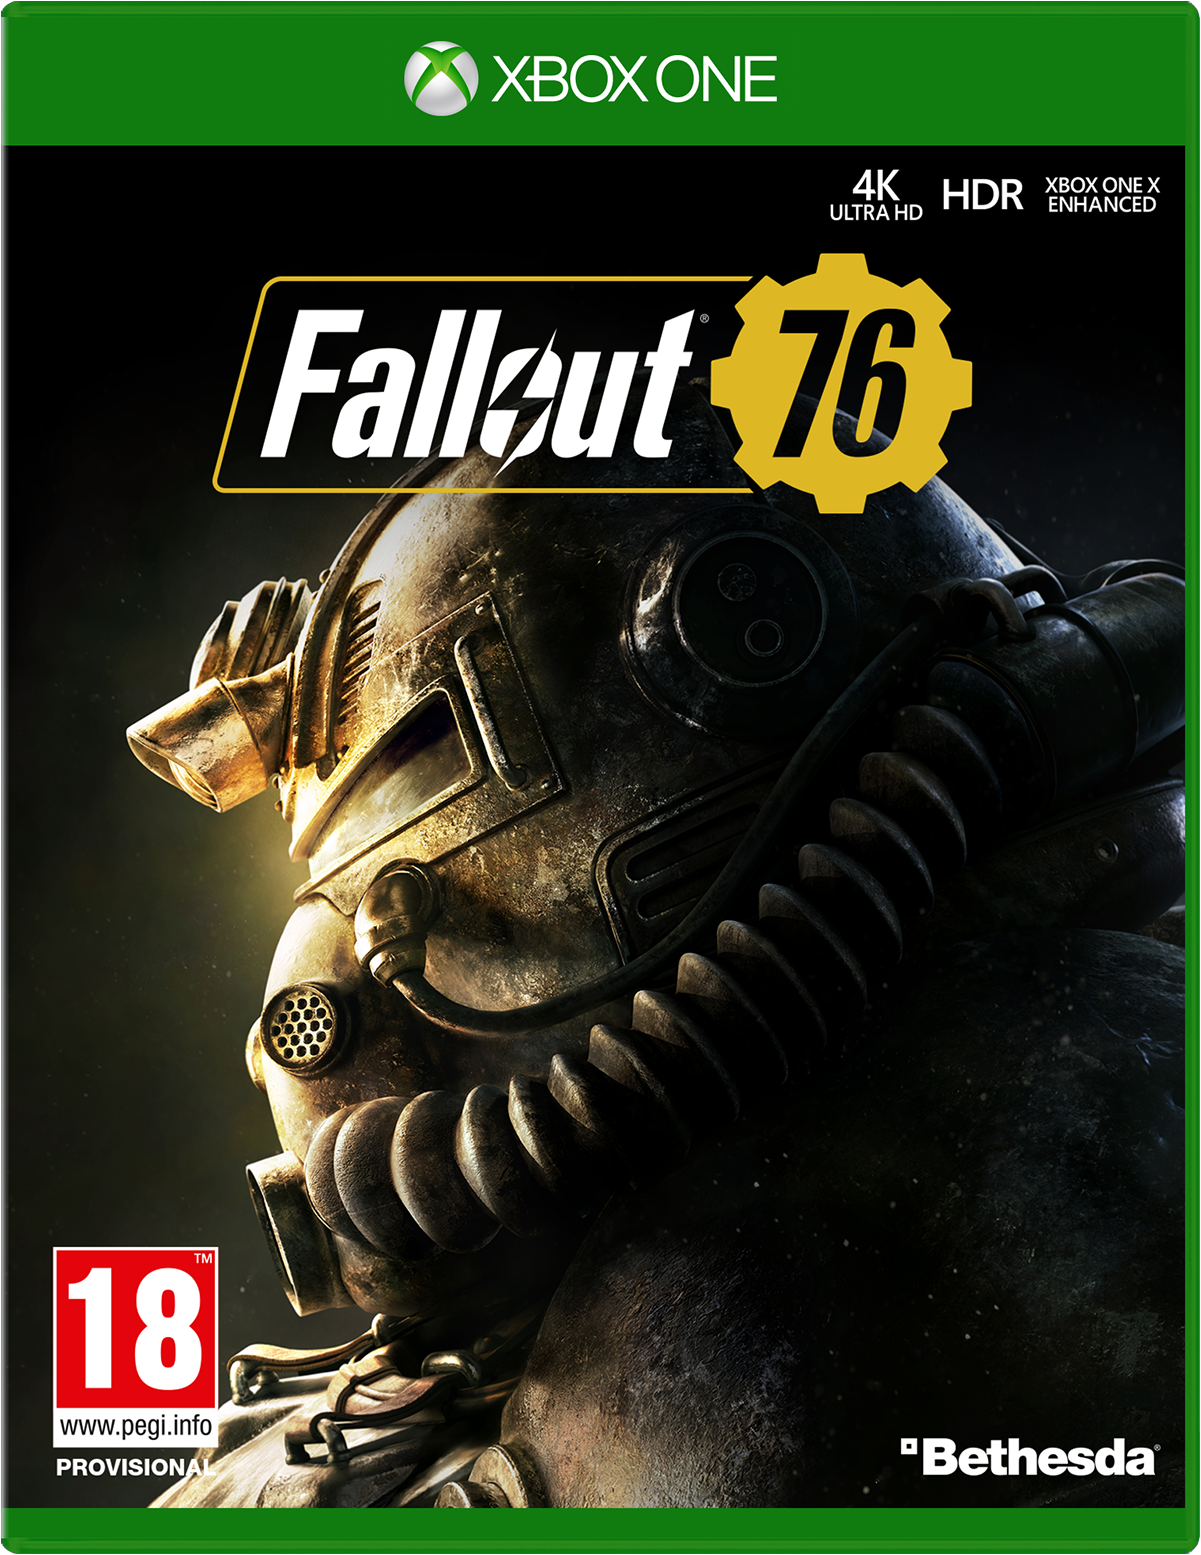 Buy Fallout 76 for Xbox One - Microsoft 